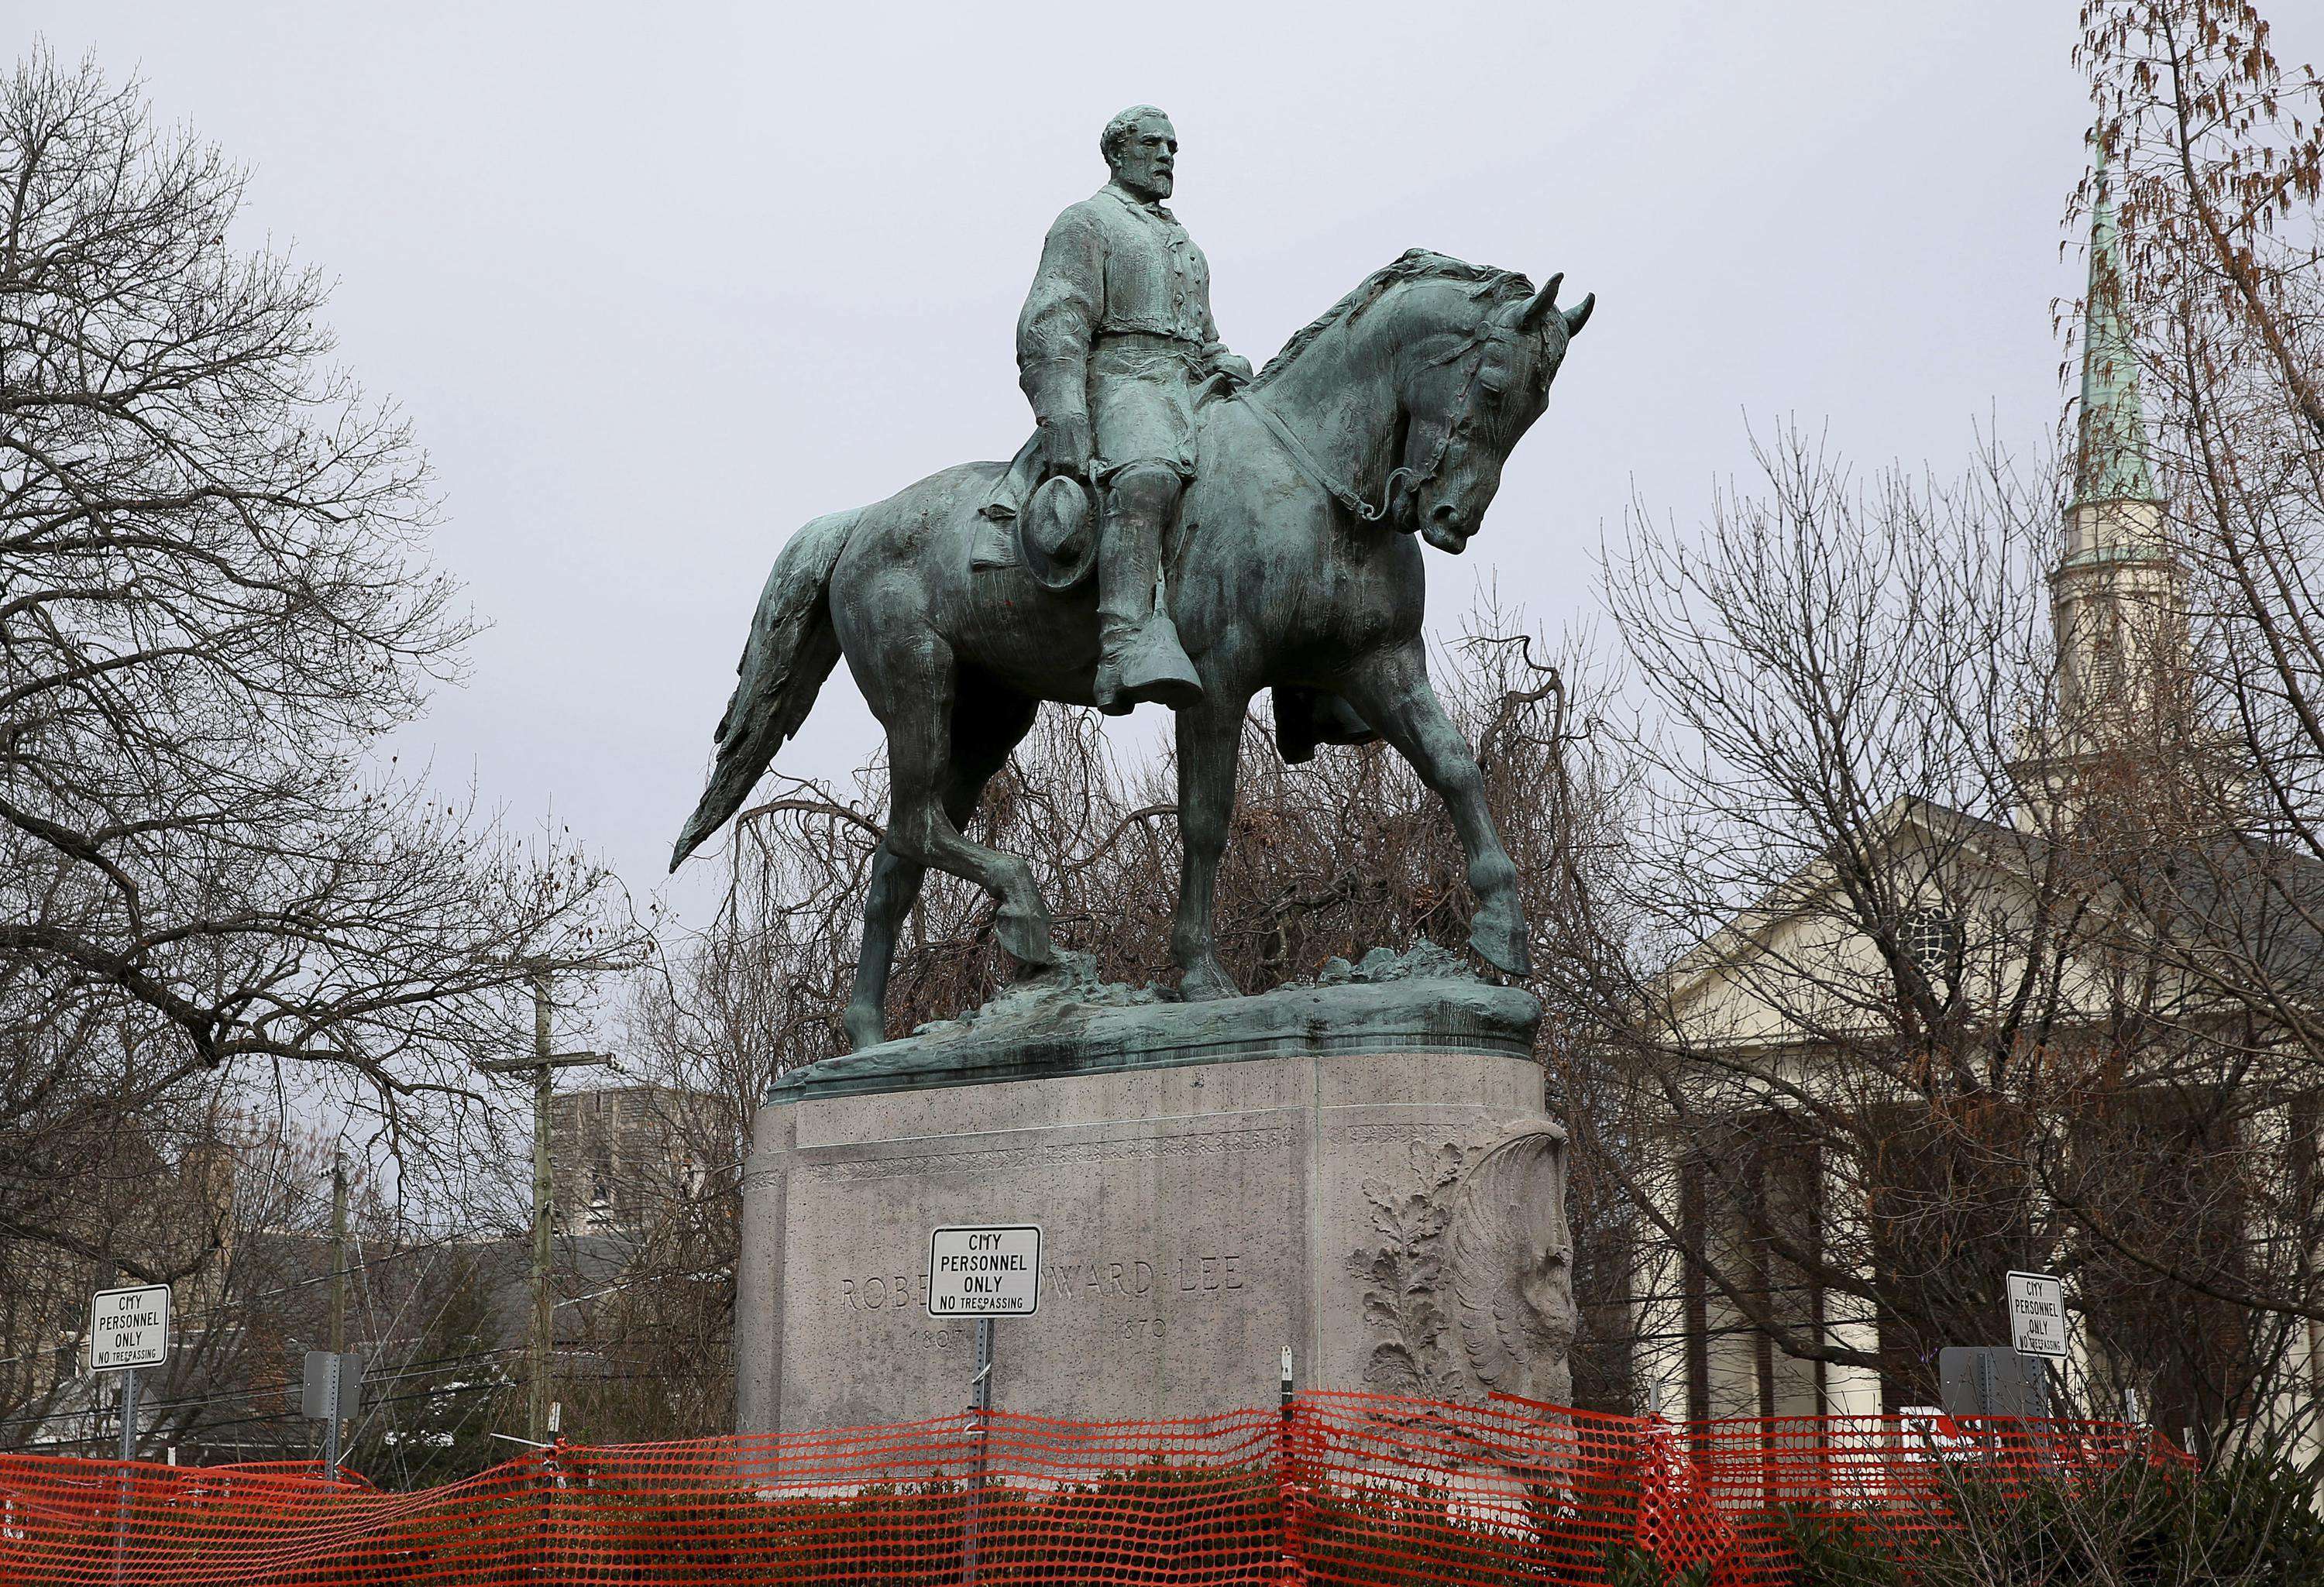 image for ‘An incredible day’ as Lee statue removed in Charlottesville